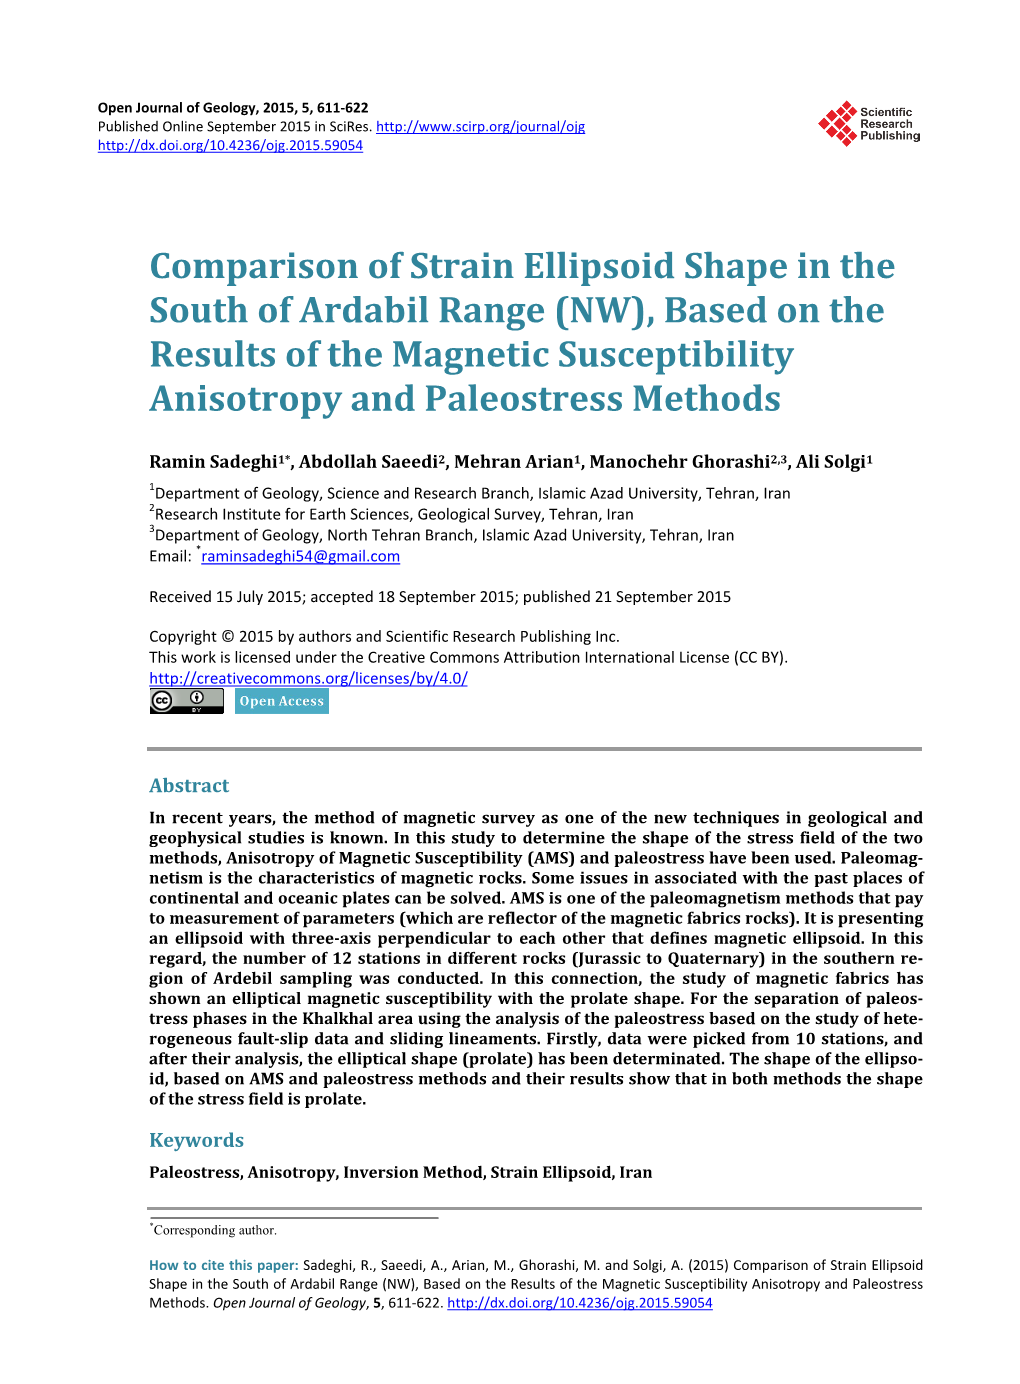 Comparison of Strain Ellipsoid Shape in the South of Ardabil Range (NW), Based on the Results of the Magnetic Susceptibility Anisotropy and Paleostress Methods